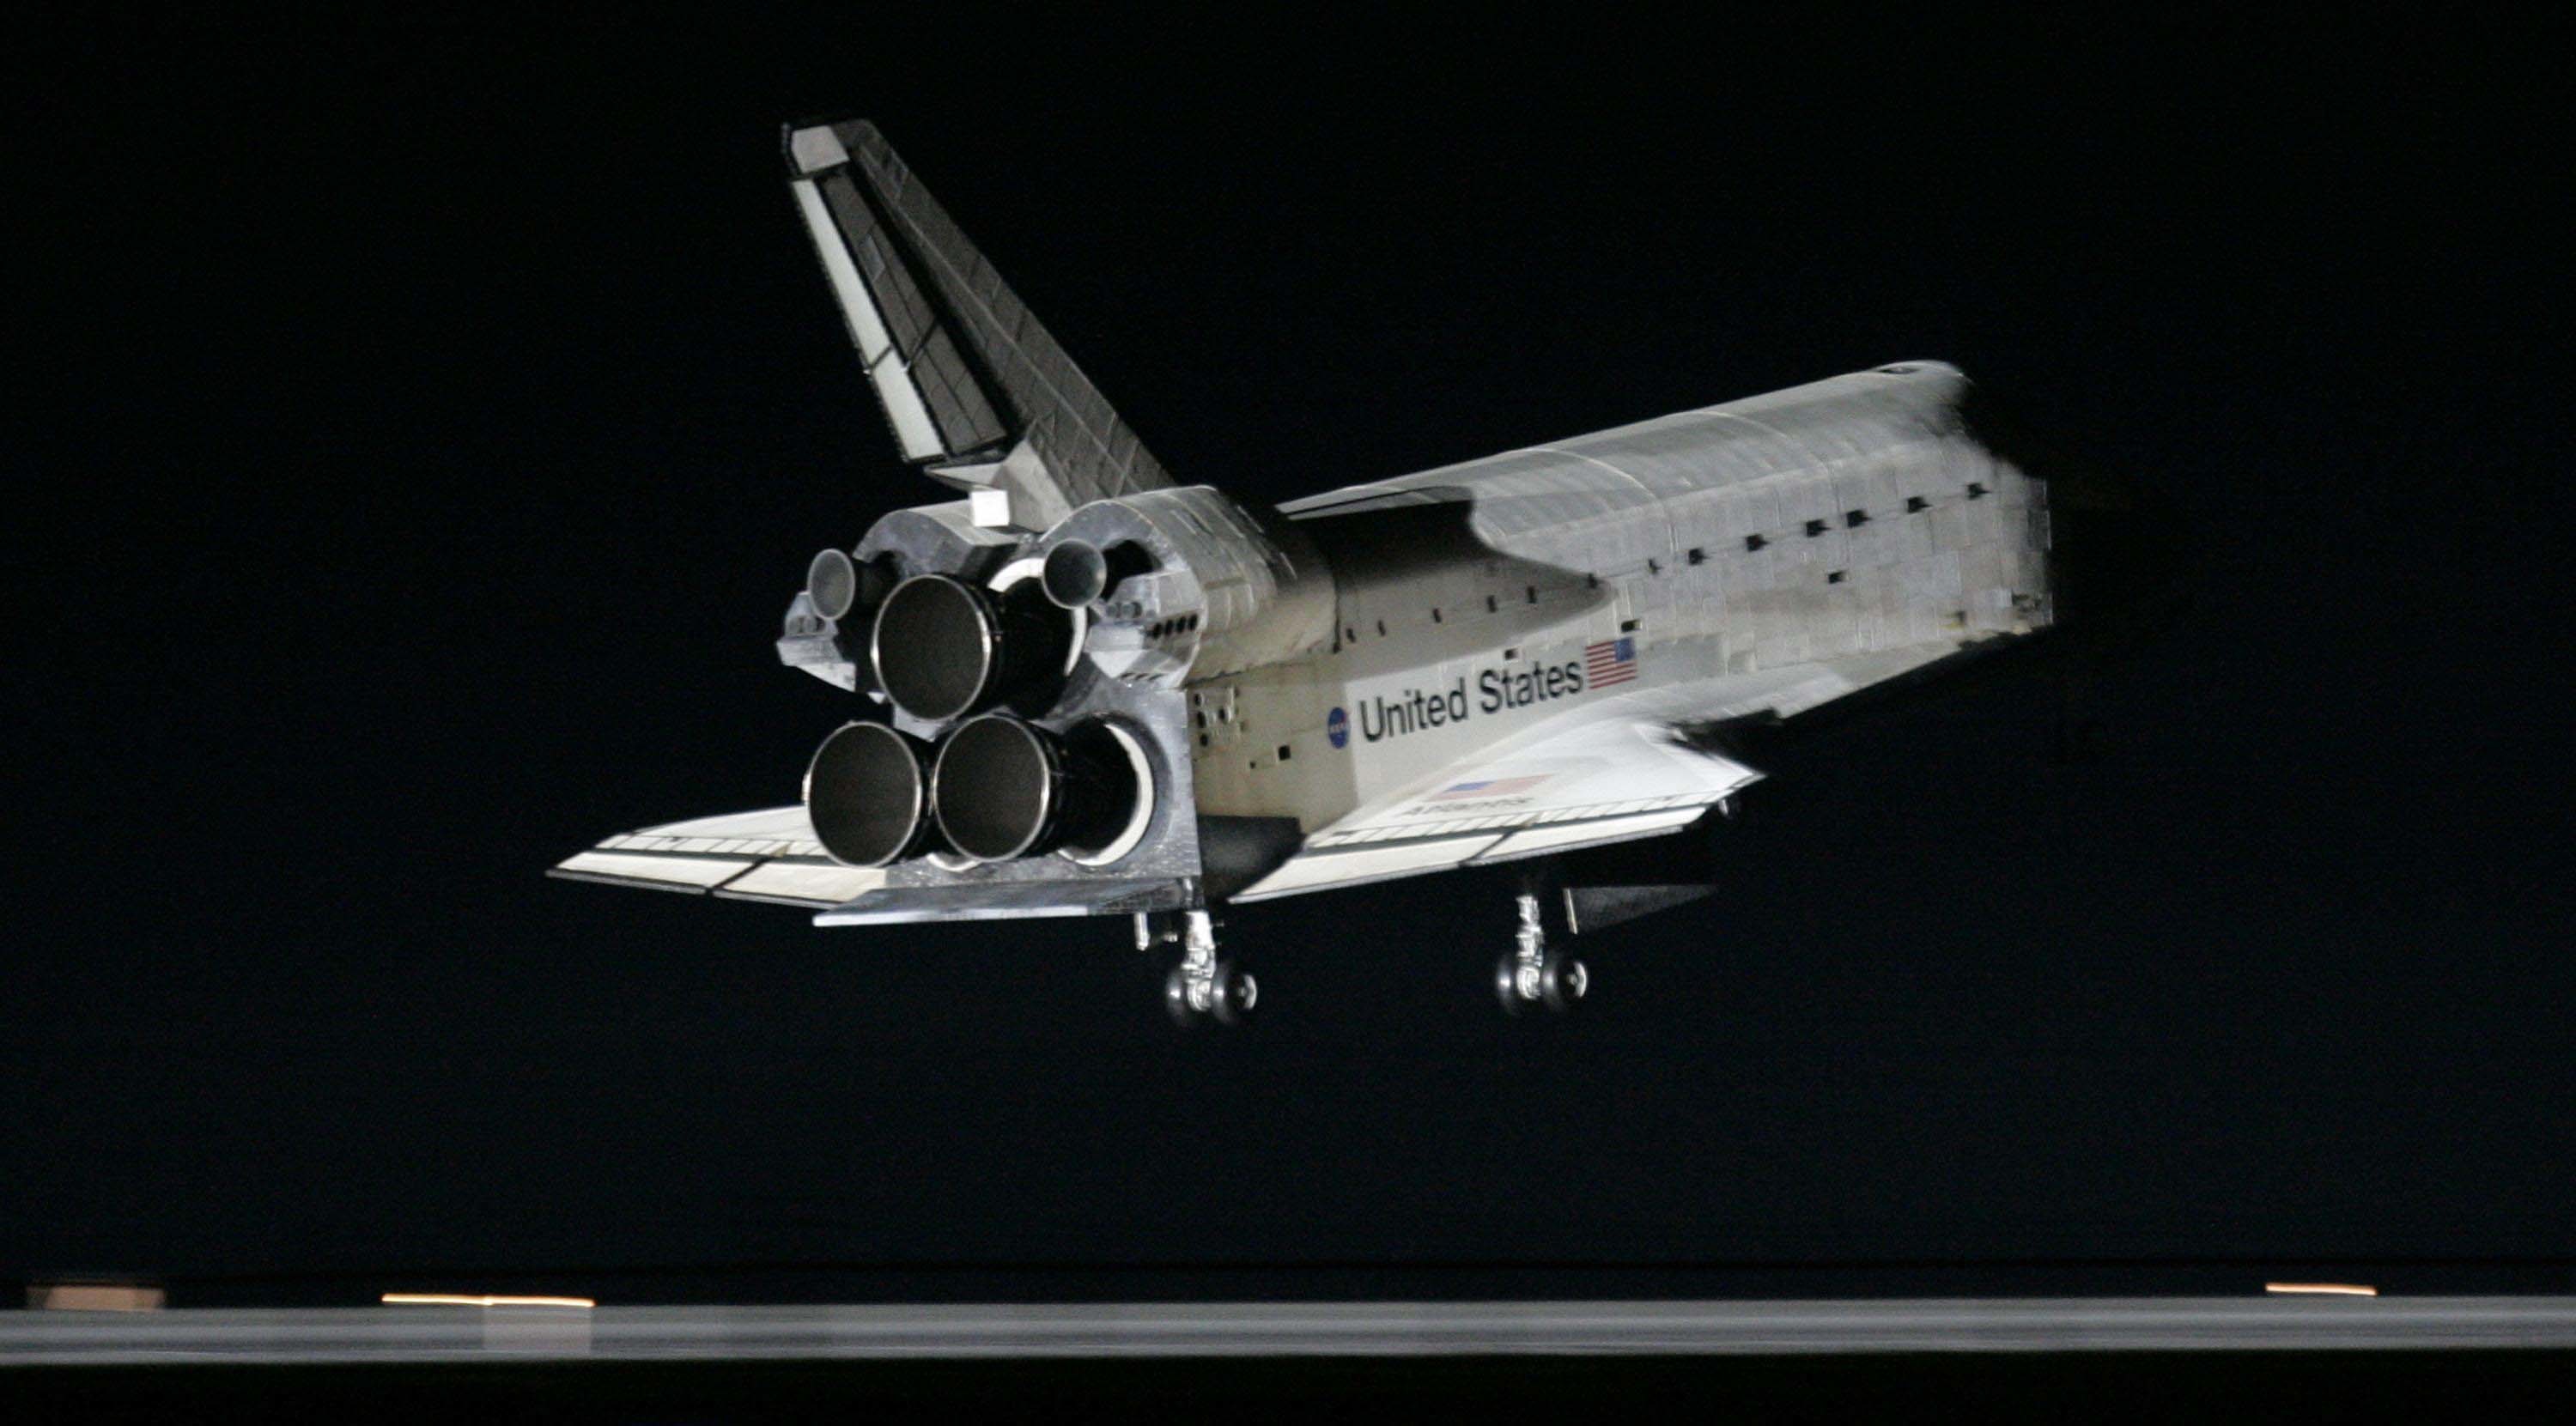 3000x1661 Shuttle Atlantis just about to touch down on runway at night